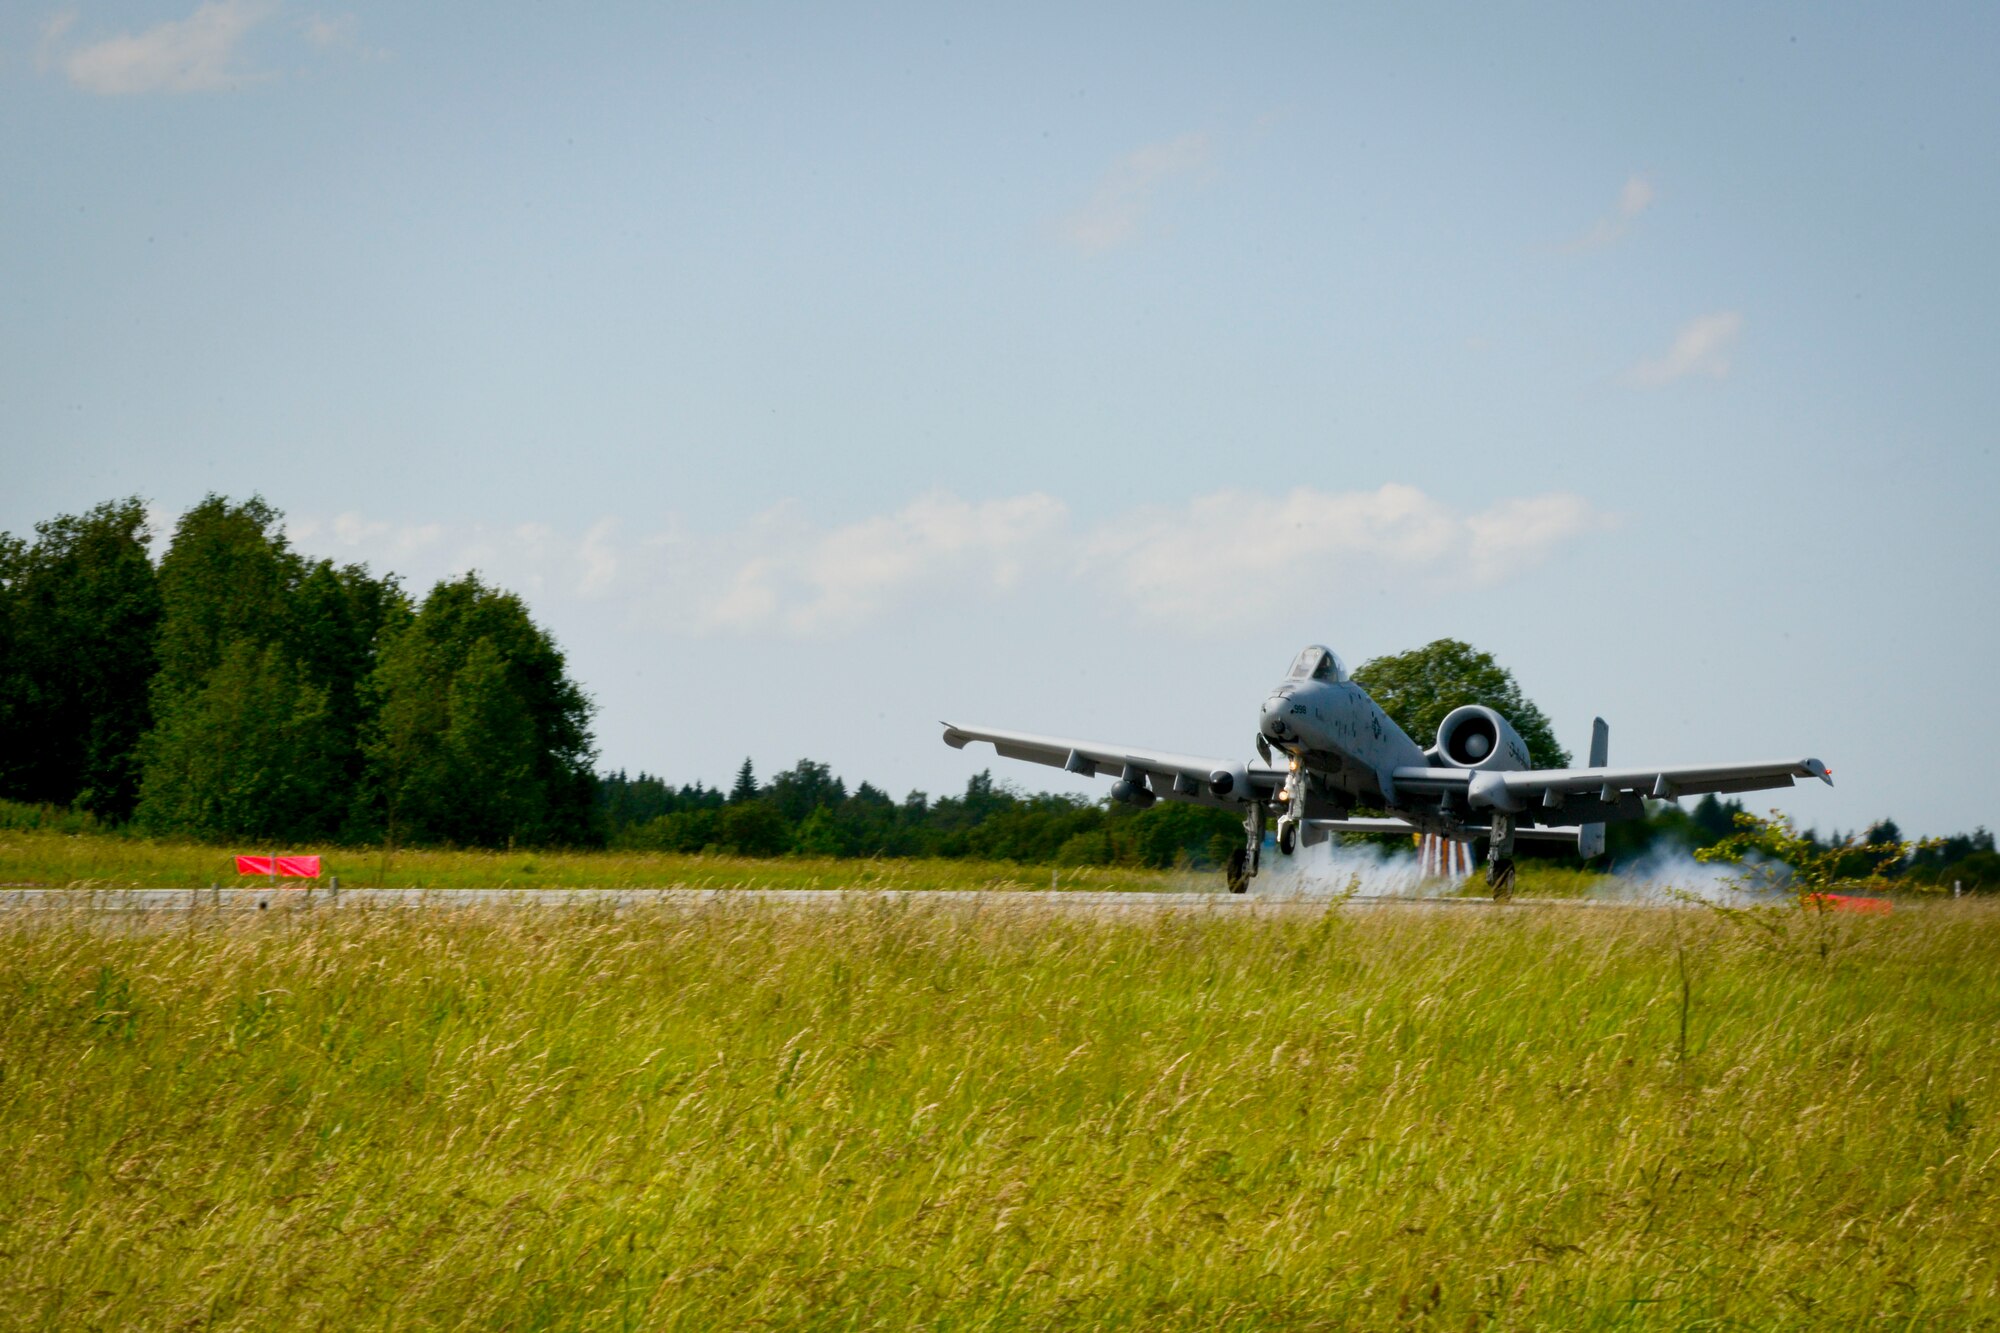 An A-10C Thunderbolt II from the 107th Fighter Squadron, takes off from a highway June 21, 2016, in Tallinn, Estonia. U.S. forces are in Europe participating in Saber Strike 16; a long-standing, U.S. Joint Chiefs of Staff-directed, U.S. Army Europe-led cooperative-training exercise, which has been conducted annually since 2010. This year’s exercise will focus on promoting interoperability with allies and regional partners. The United States has enduring interests in supporting peace and prosperity in Europe and bolstering the strength and vitality of NATO, which is critical to global security. (U.S. Air Force photo/Senior Airman Nicole Keim)